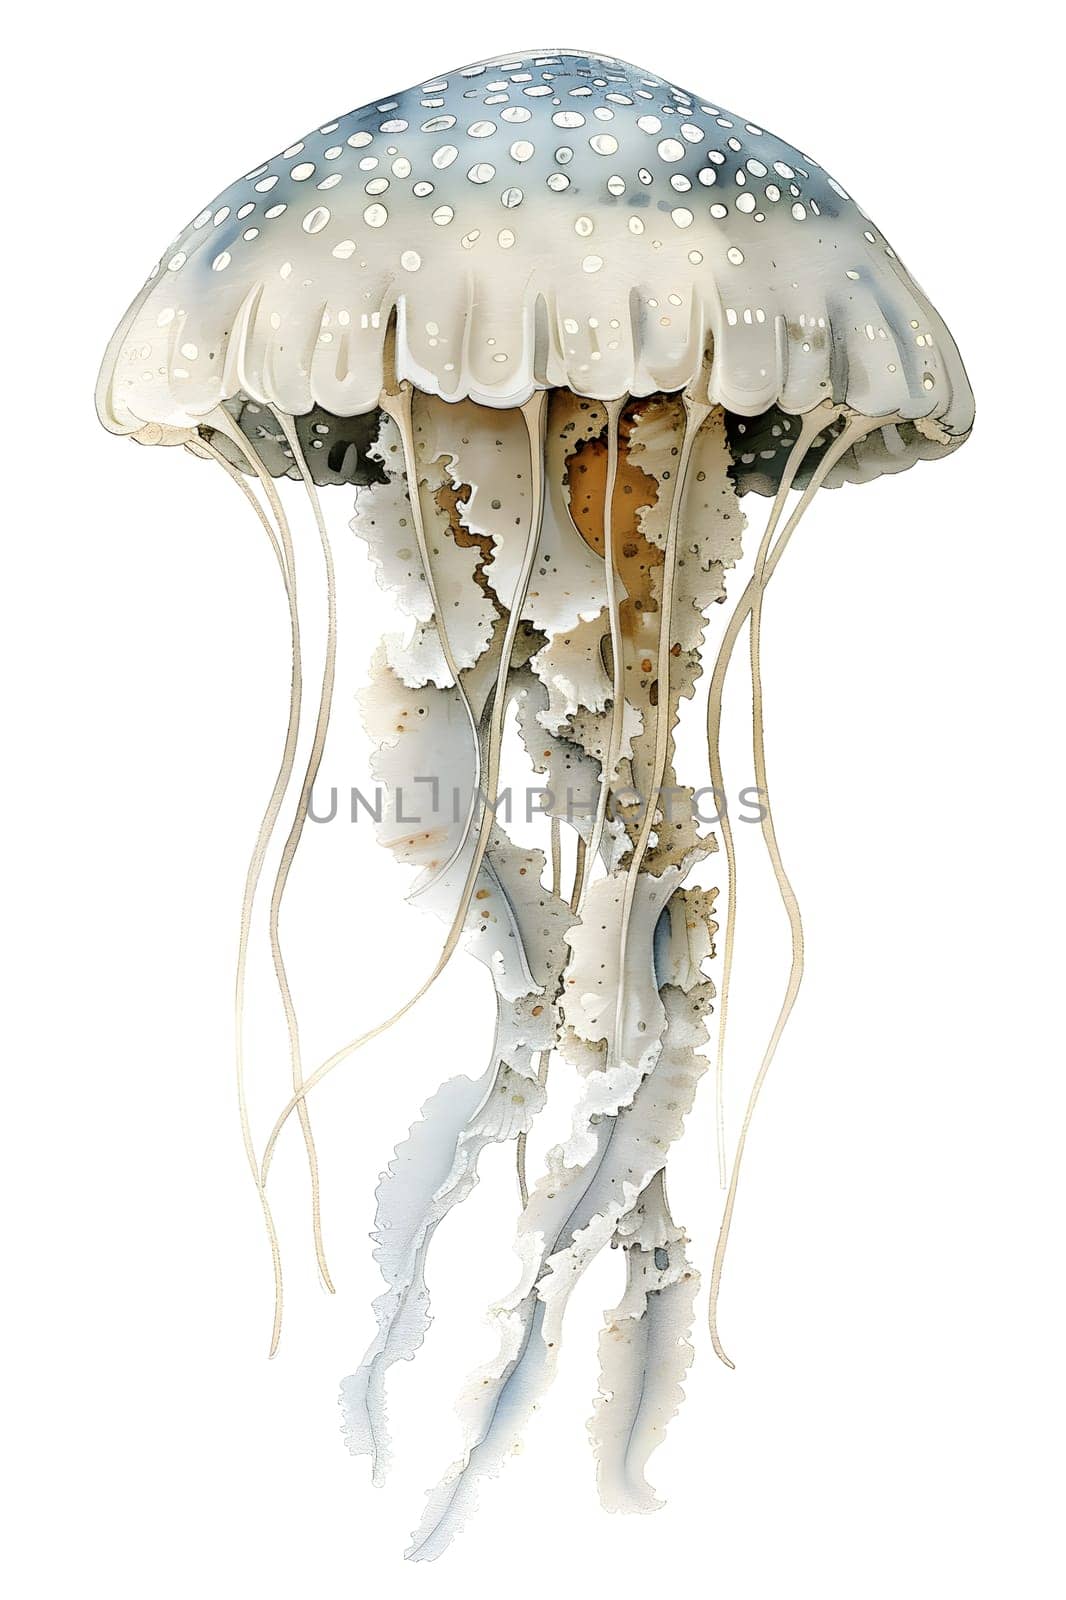 A frozen jellyfish art piece on transparent material, a unique ceiling fixture by Nadtochiy